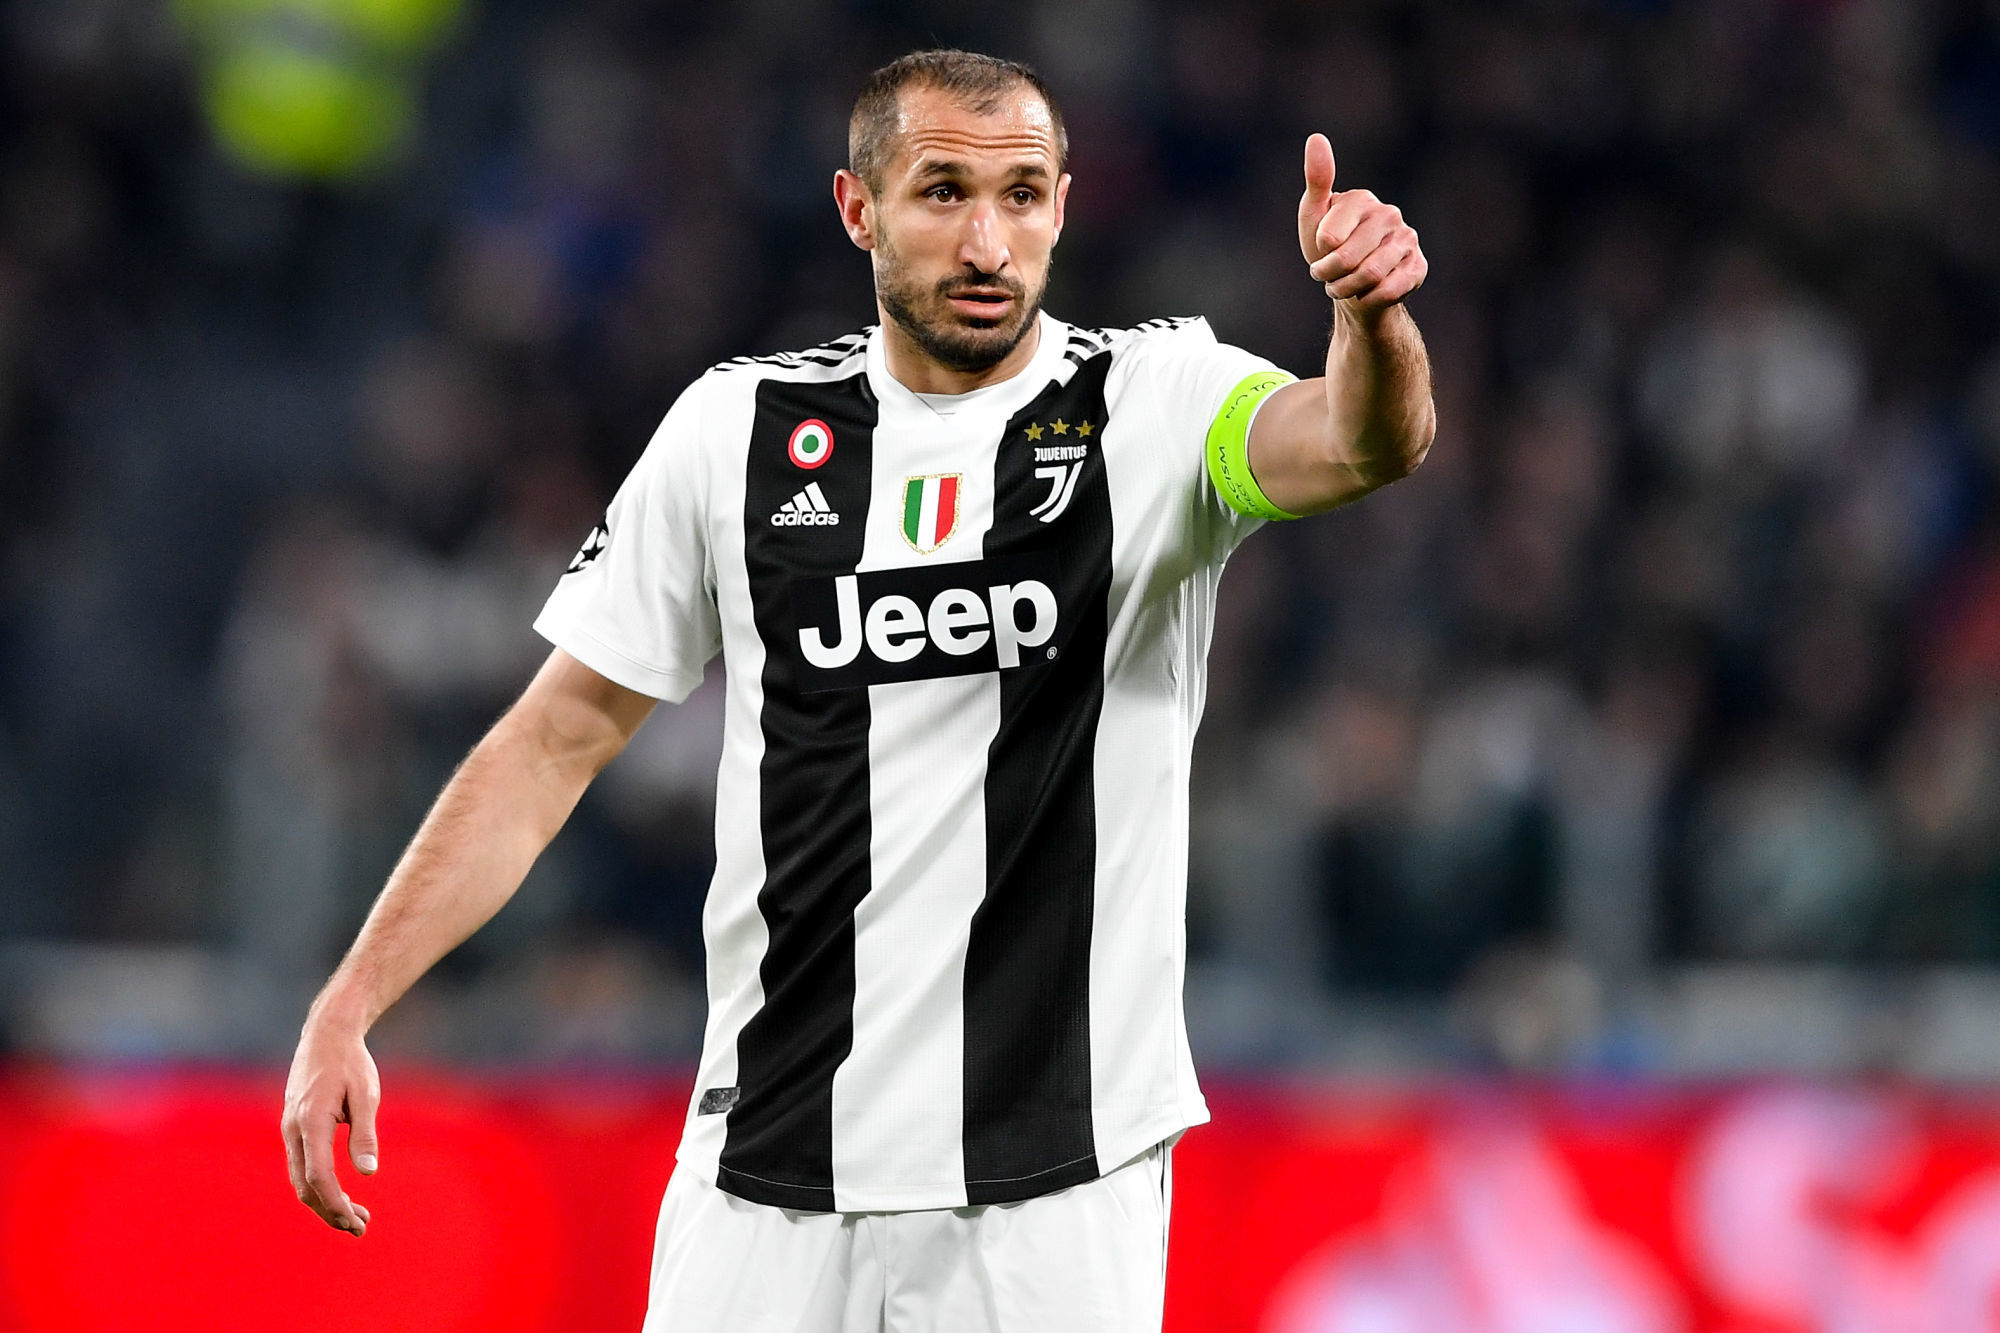 Giorgio Chiellini of Juventus reacts during the Uefa Champions League 2018/2019 round of 16 second leg football match between Juventus and Atletico Madrid at Juventus stadium, Turin, March, 12, 2019 
Photo : SUSA / Icon Sport